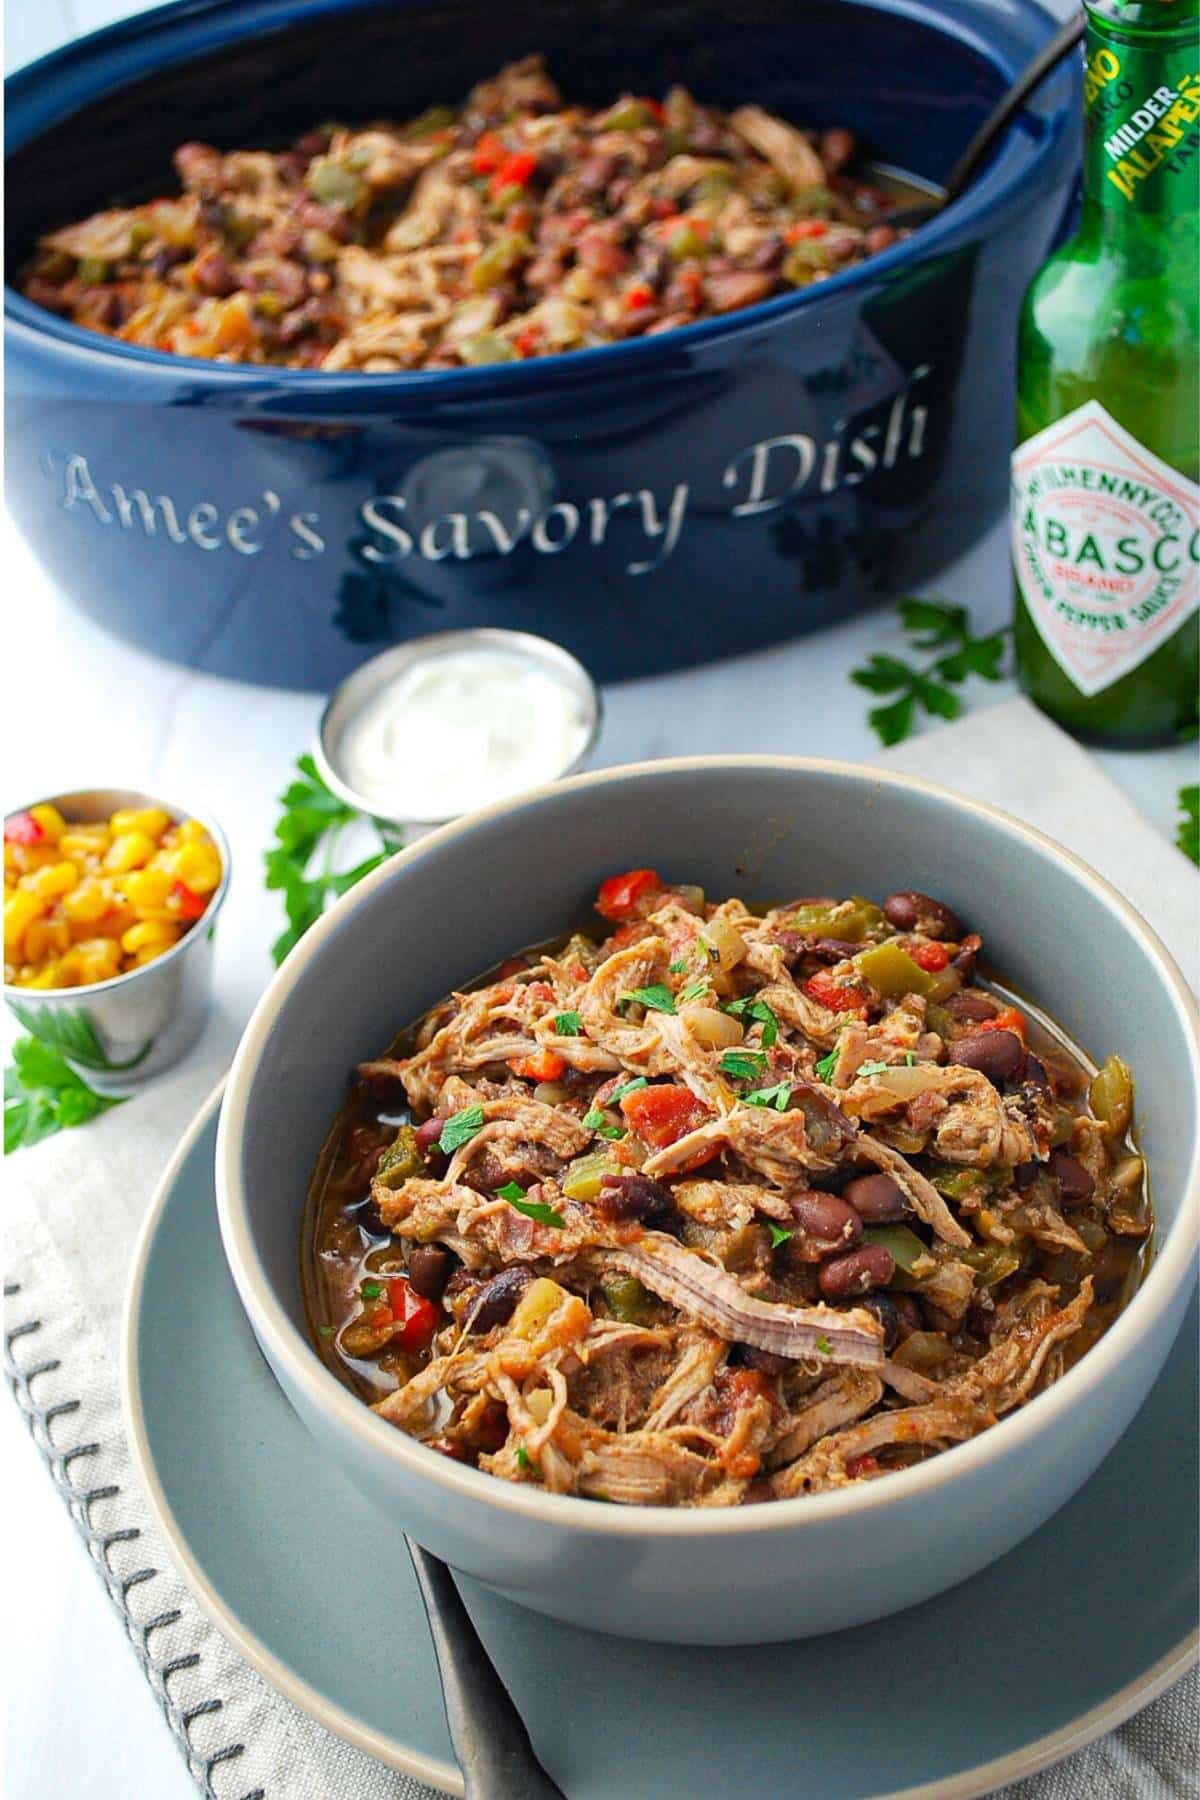 a serving bowl of chili with a bowl of chili in front of it with garnishes and a bottle of Tabasco